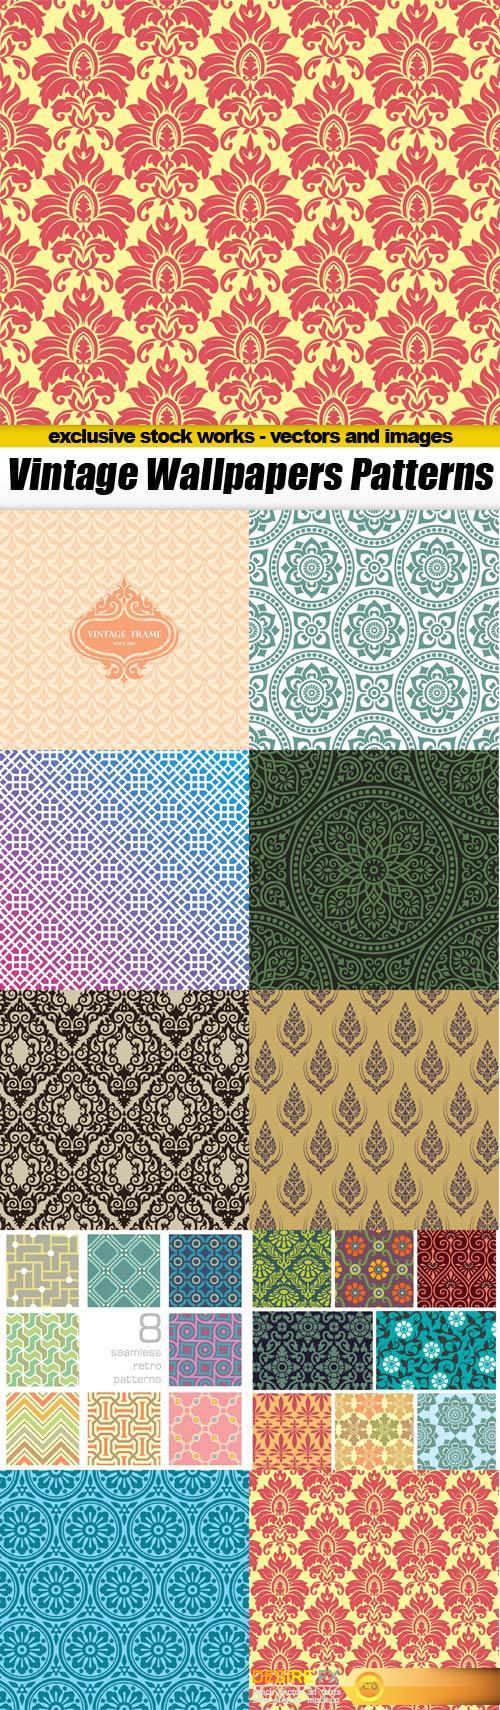 Vintage Wallpapers Patterns - 10x EPS